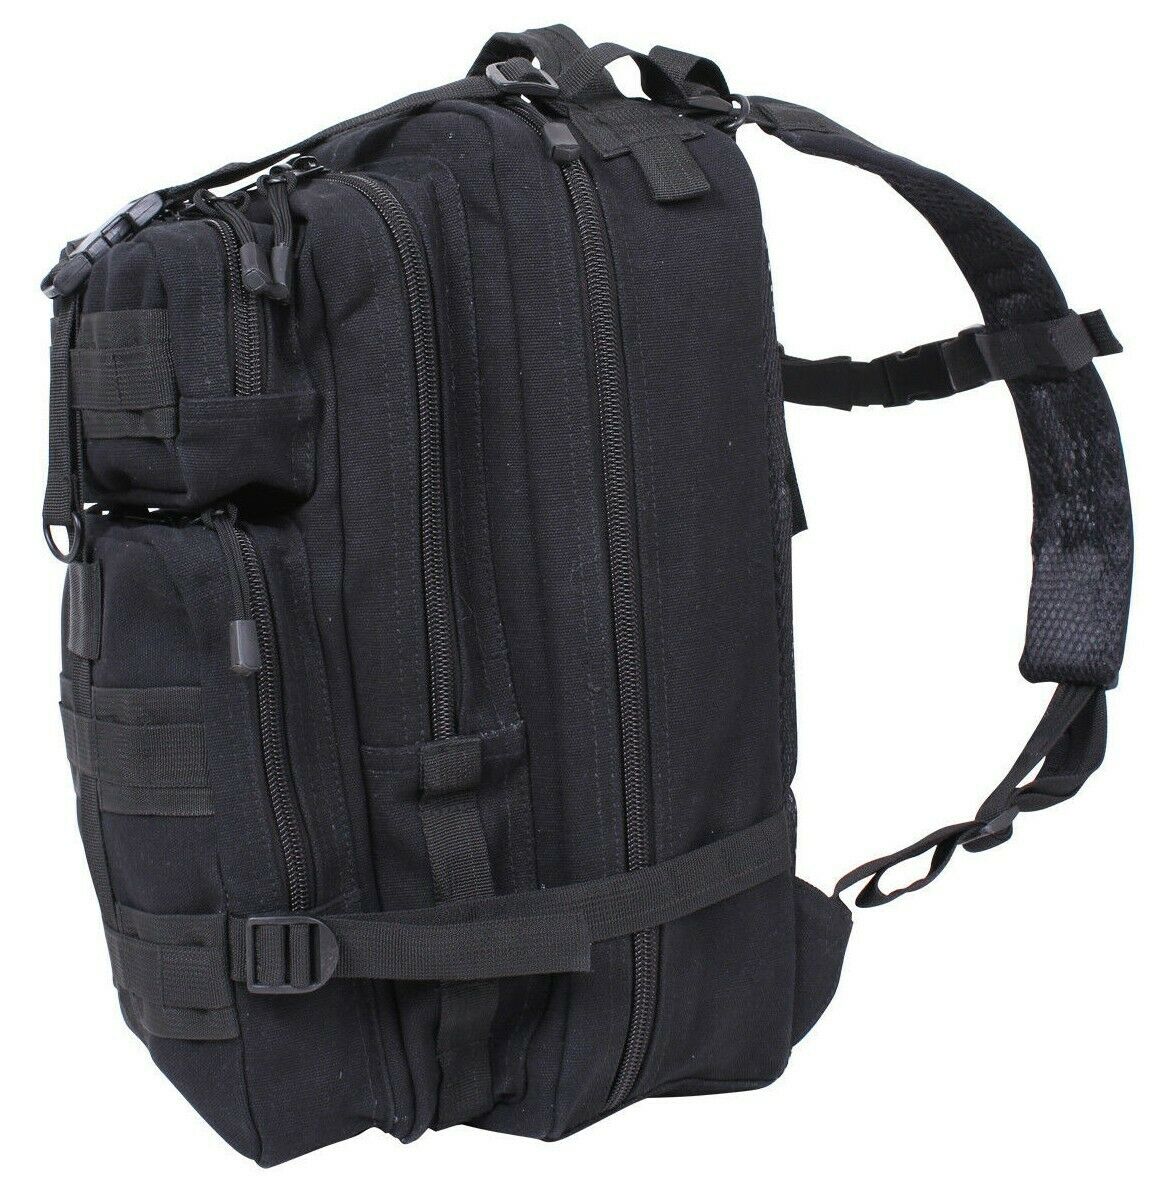 Rothco Tacticanvas Canvas Medium Transport Go Pack Backpack